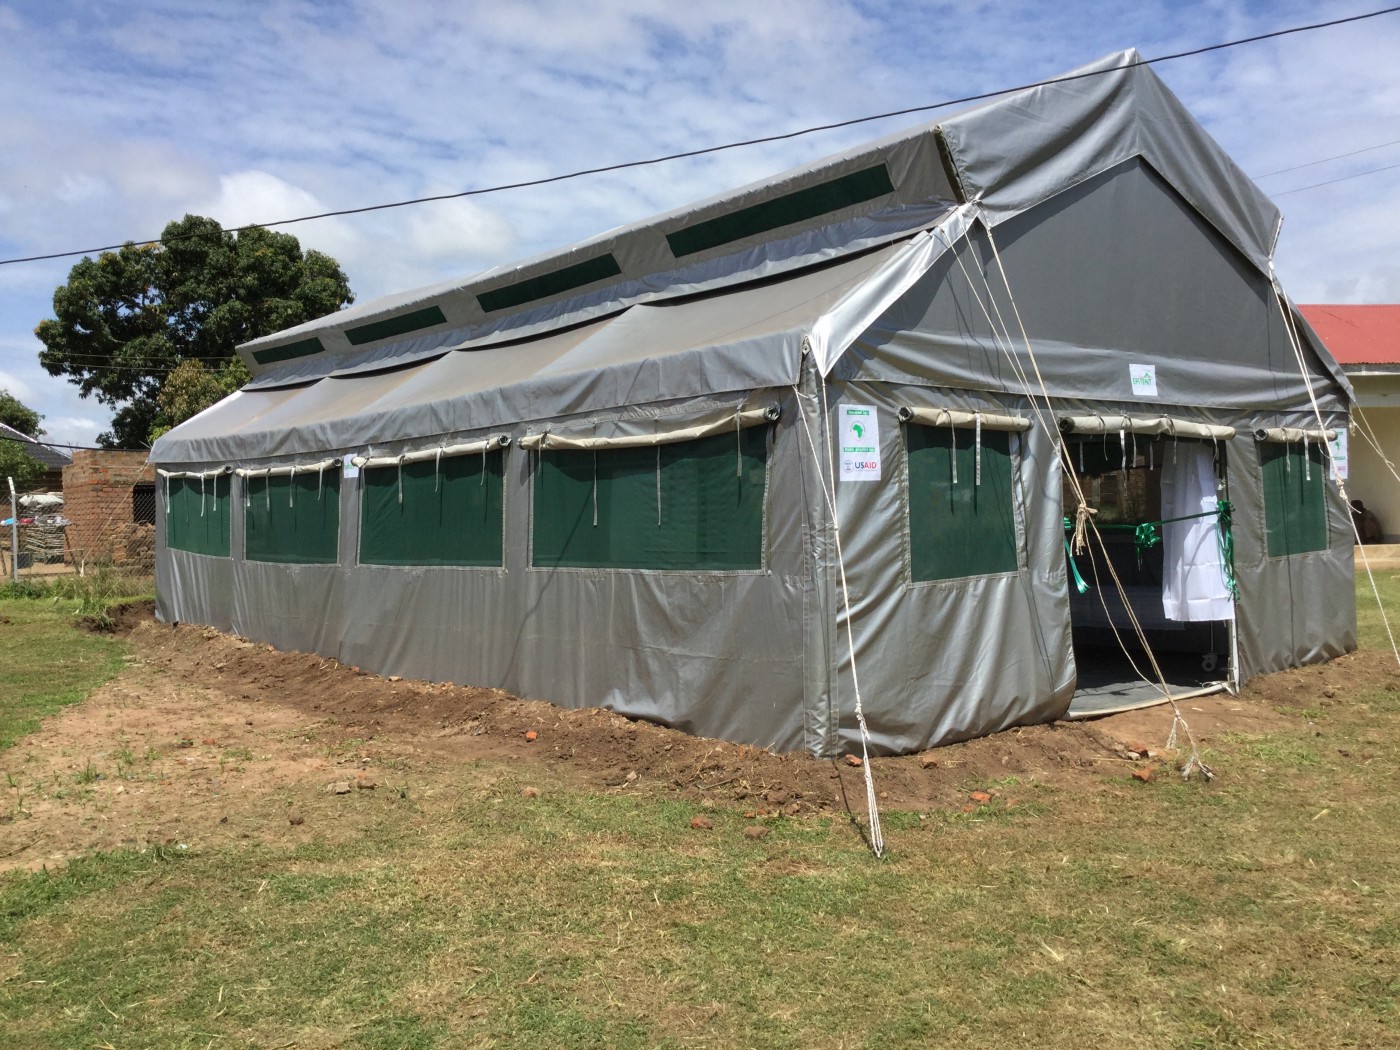 The EpiTent, shown here in the Adjumani district in 2017, was used during the West African Ebola outbreak. The design of the tent offers better ventilation than standard medical tents and allows for flexible staging locations. The innovation has been adapted for the COVID-19 pandemic. / ResilientAfrica Network